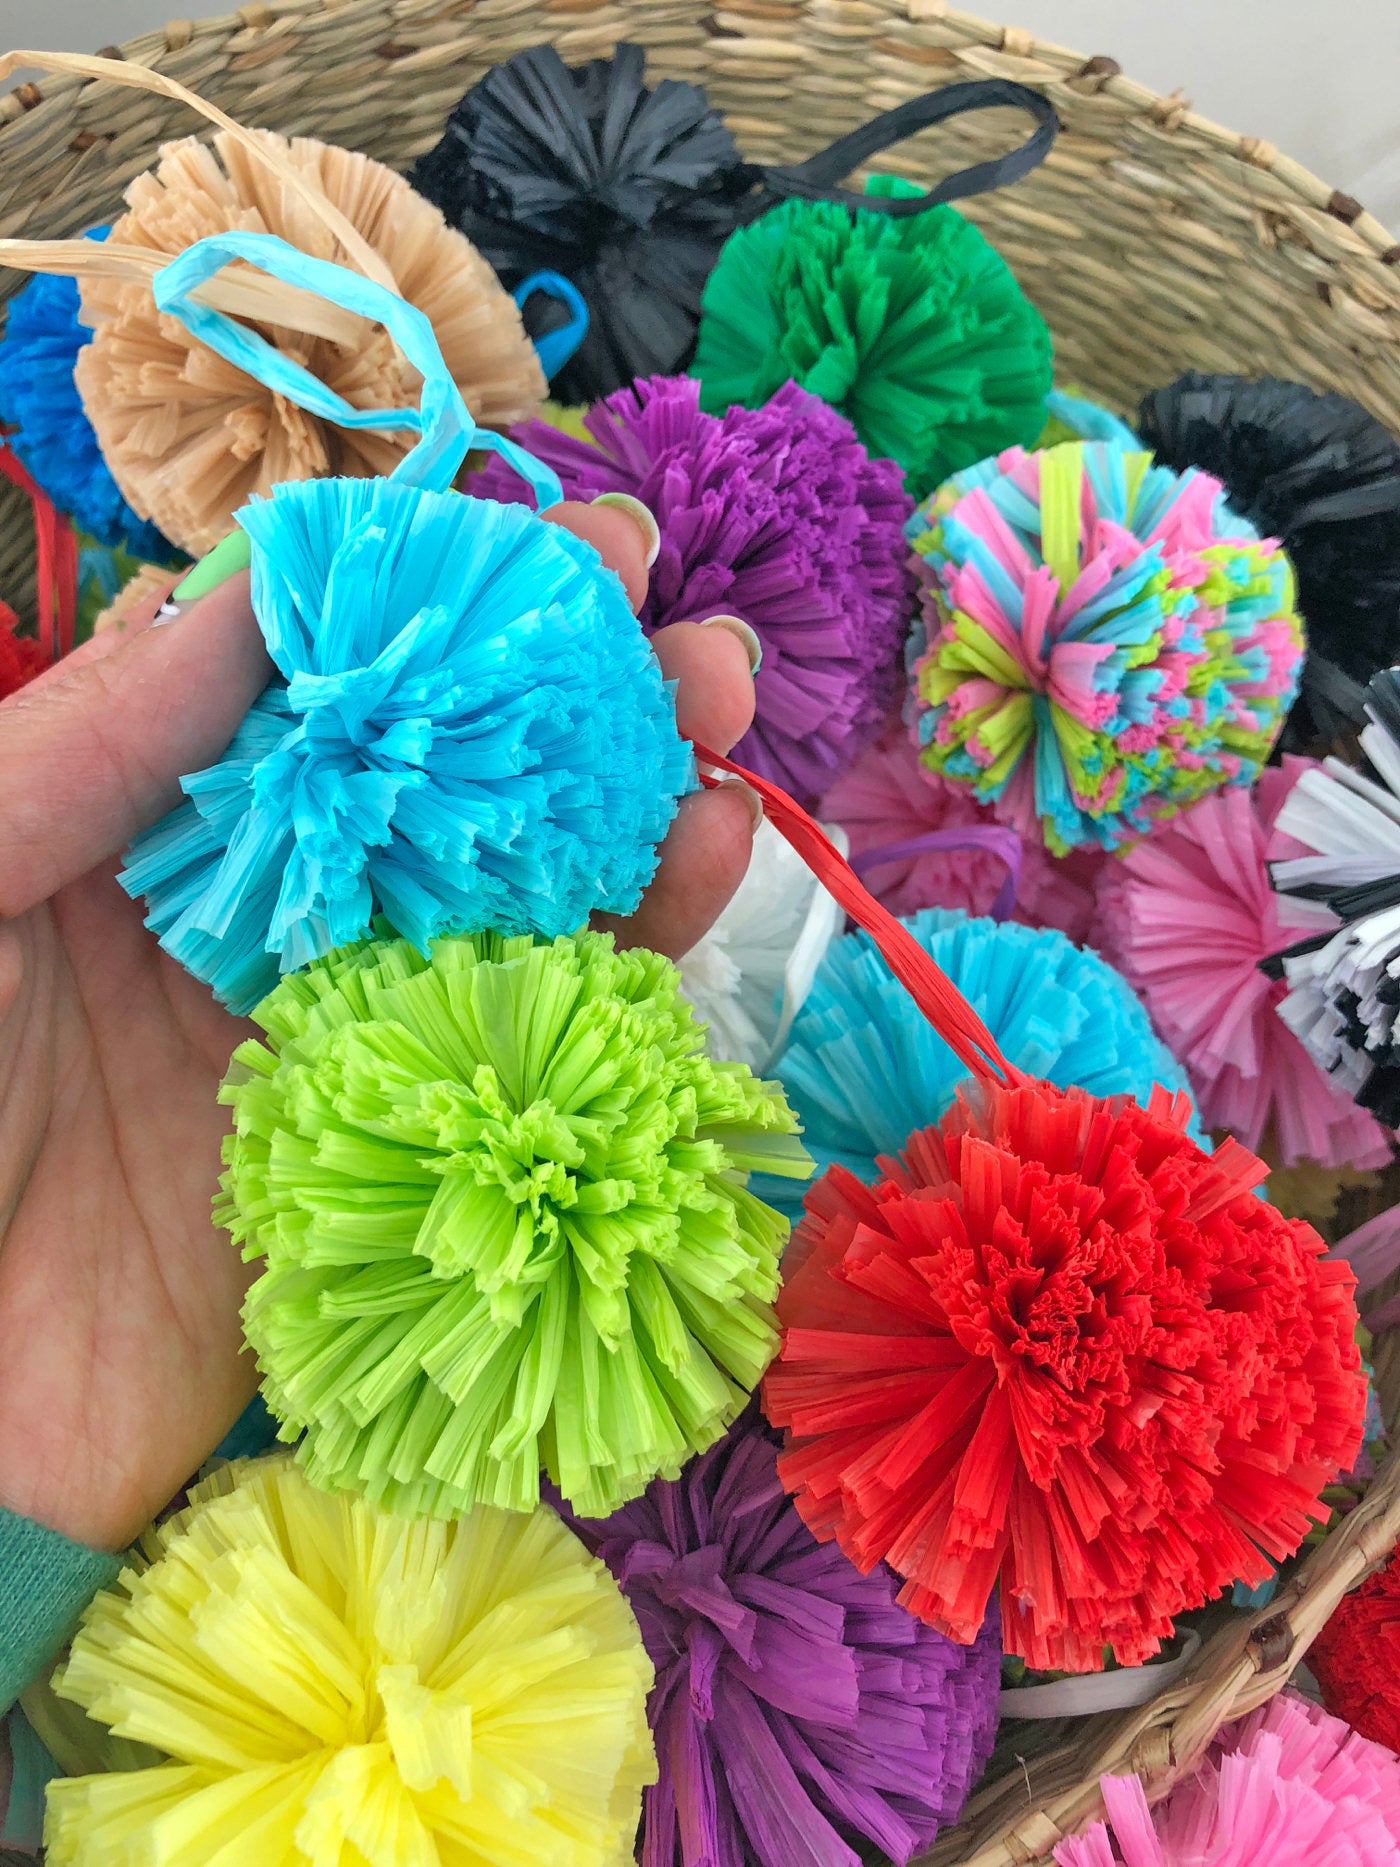 Large Pom Poms for Creative Projects